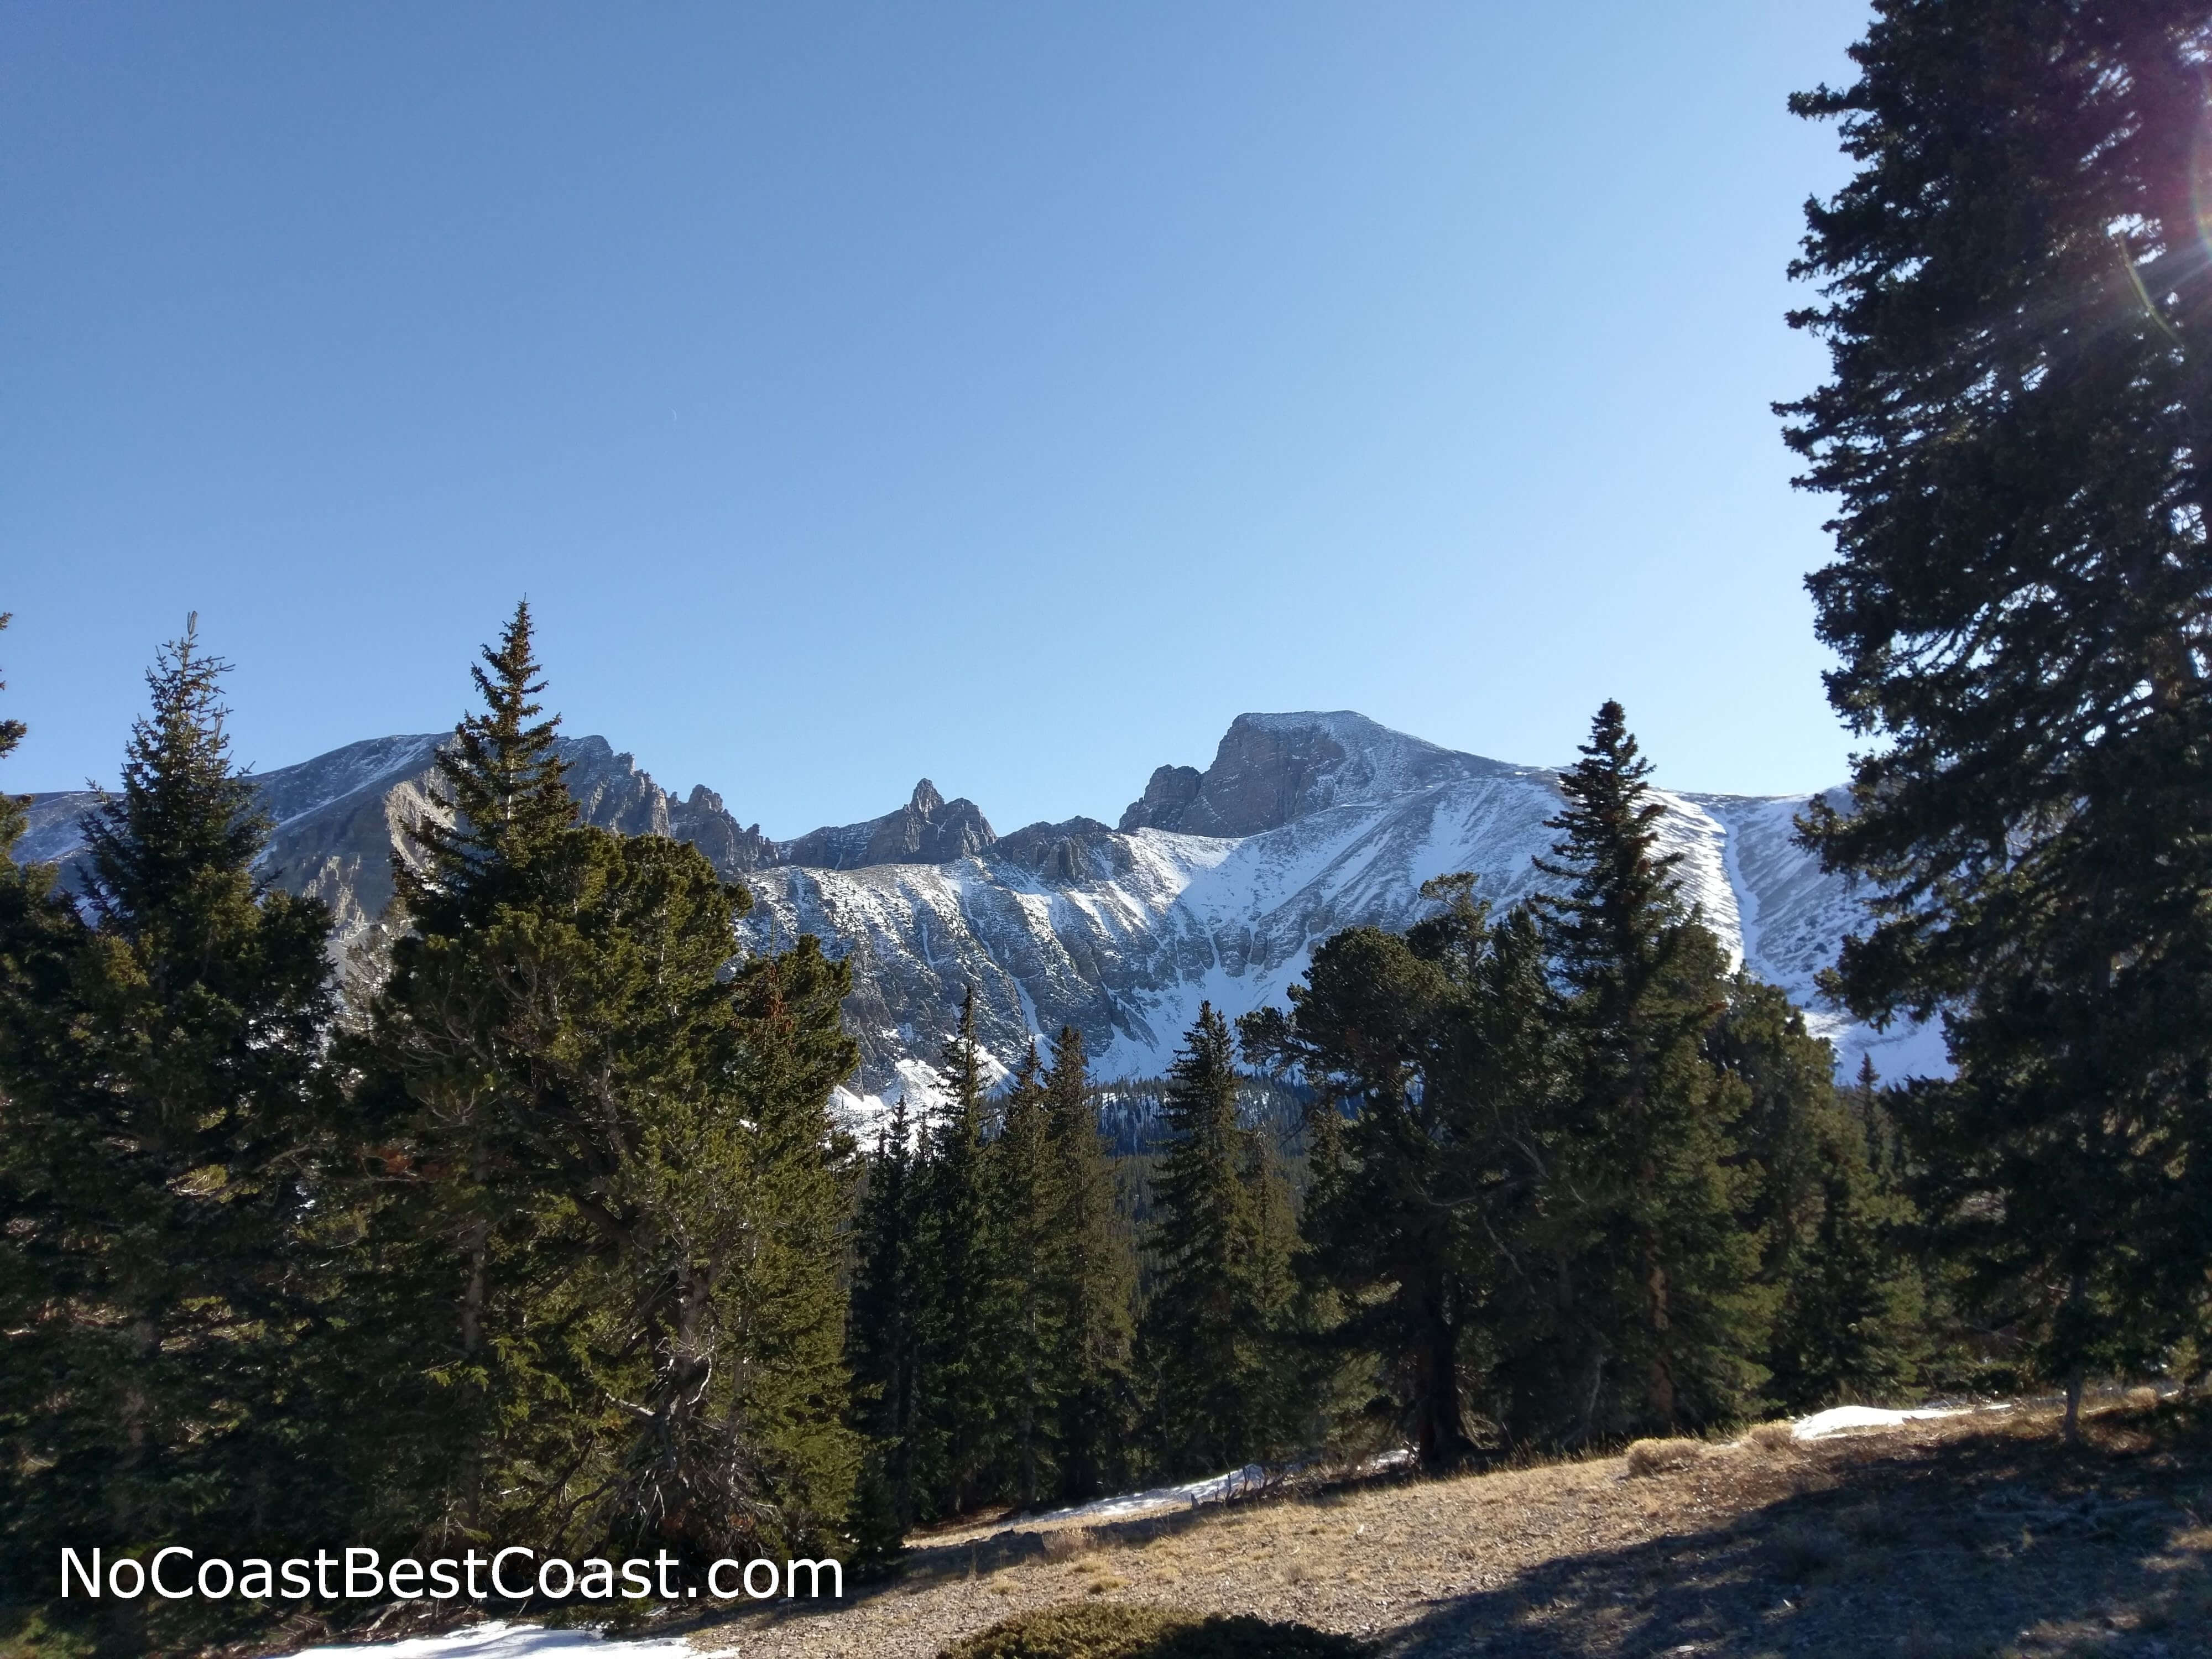 Snow-capped 13,000 foot Wheeler Peak towering over the pine forest